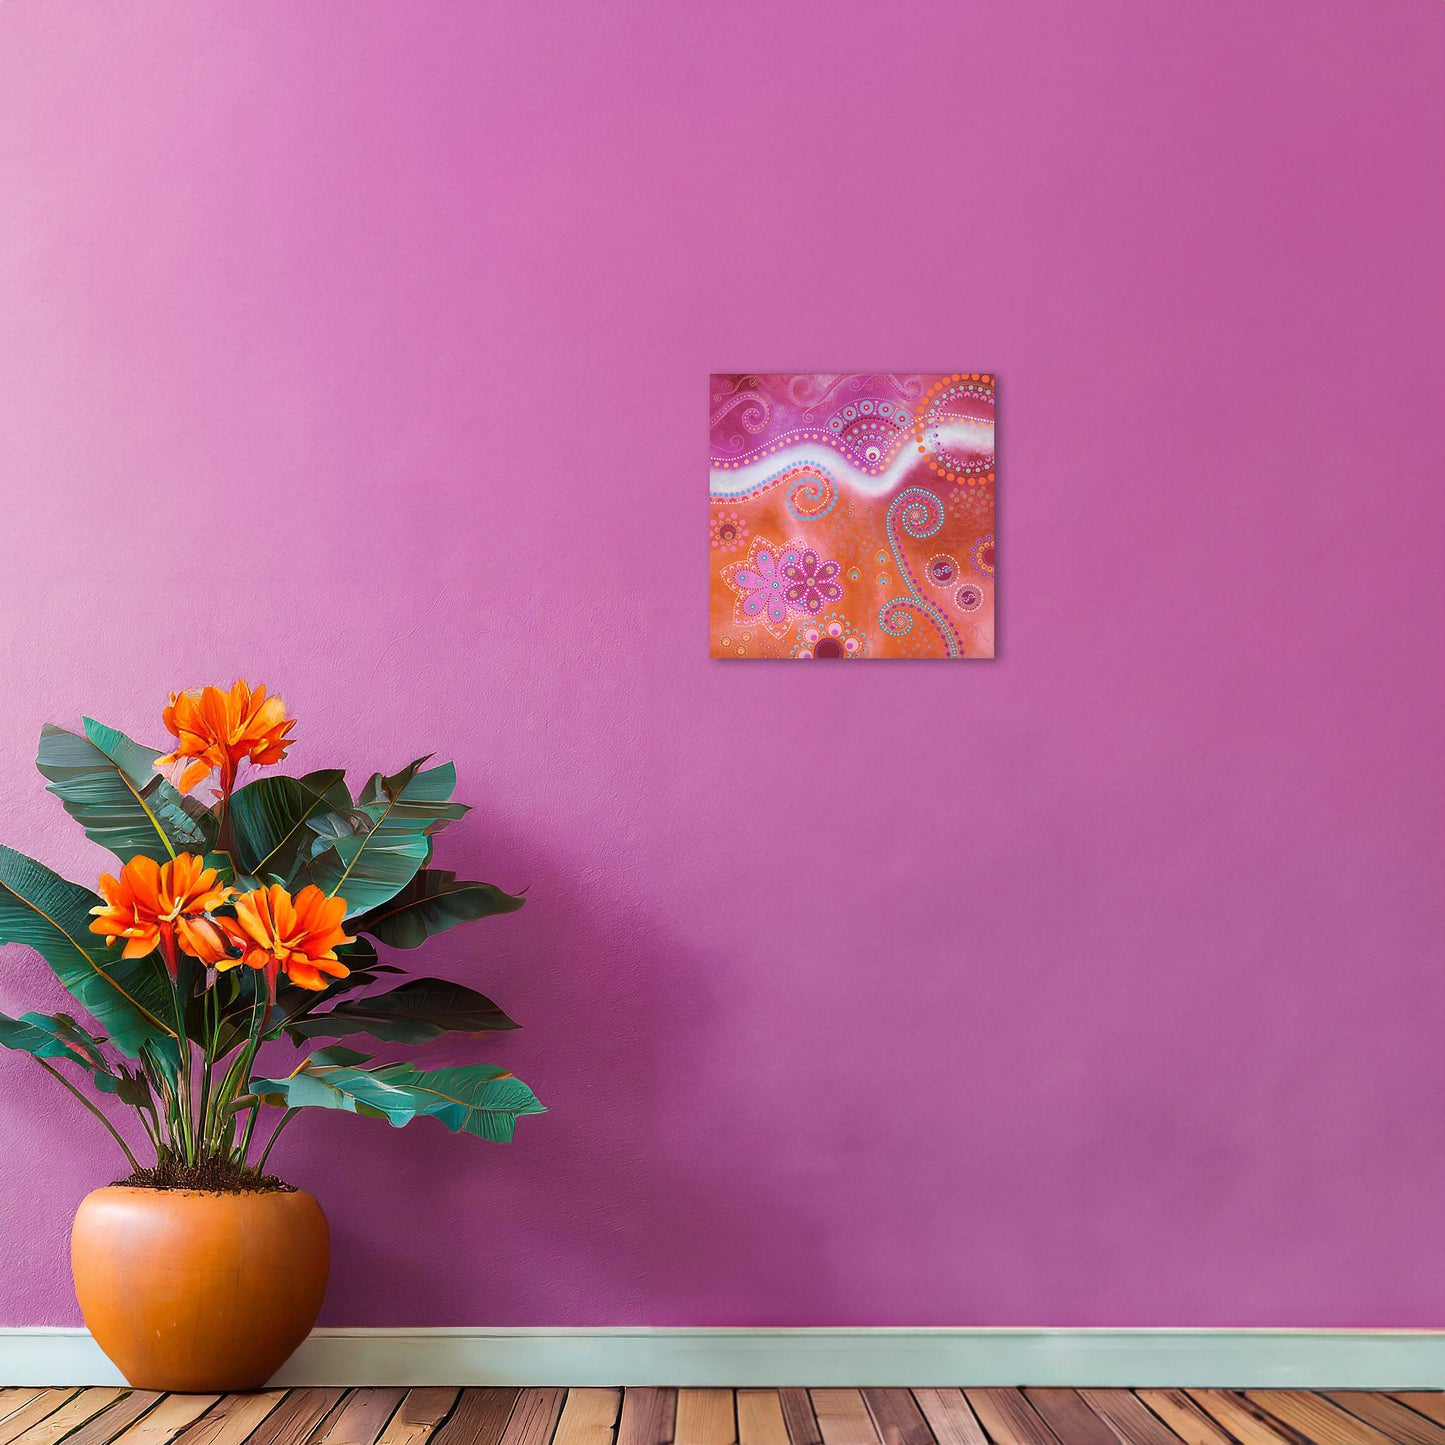 "The Happiness inside" - Pink and orange - by Fanny Fay Engström